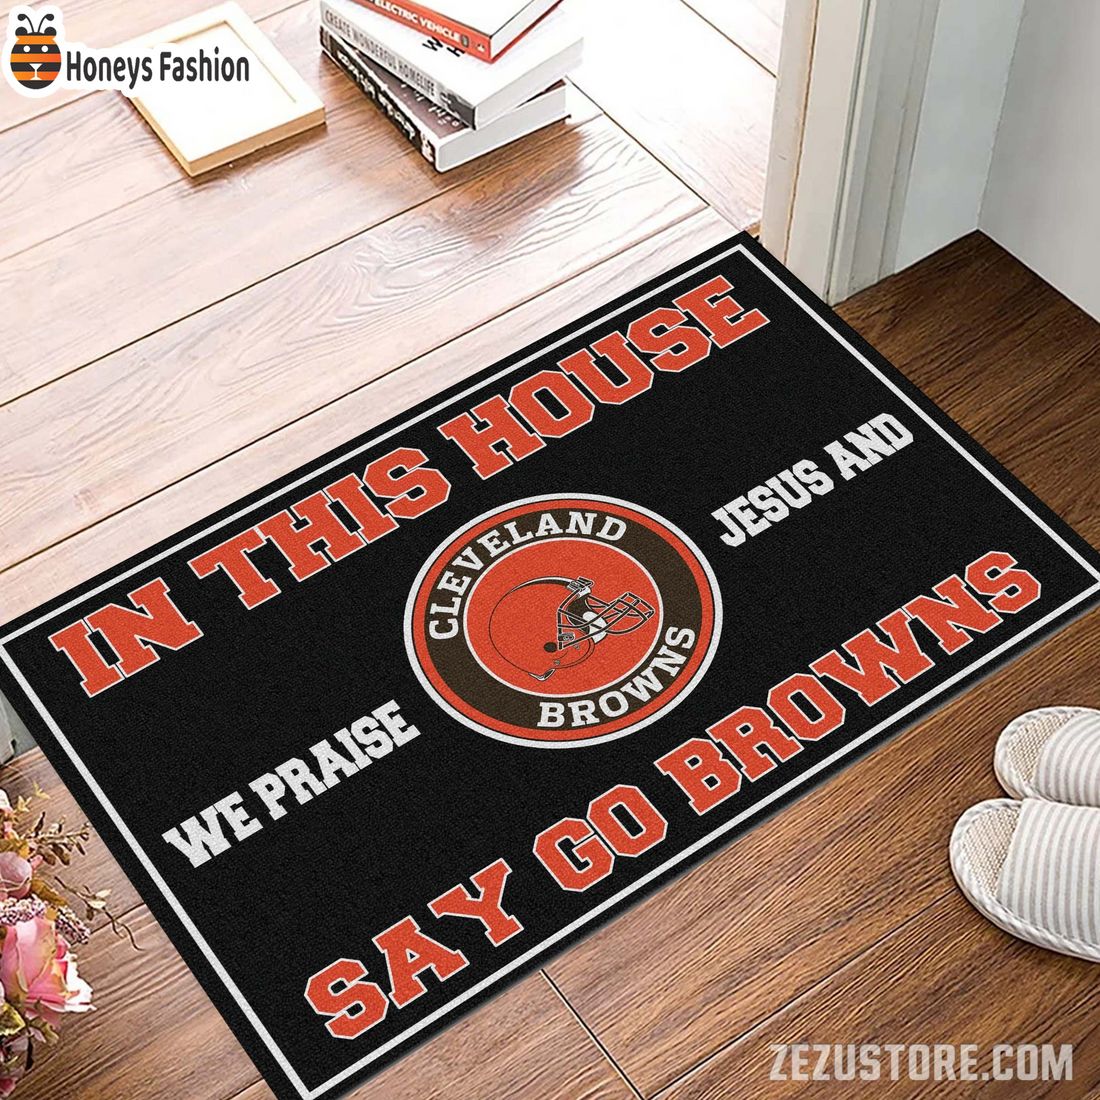 In this house we praise jesus and say go Browns doormat